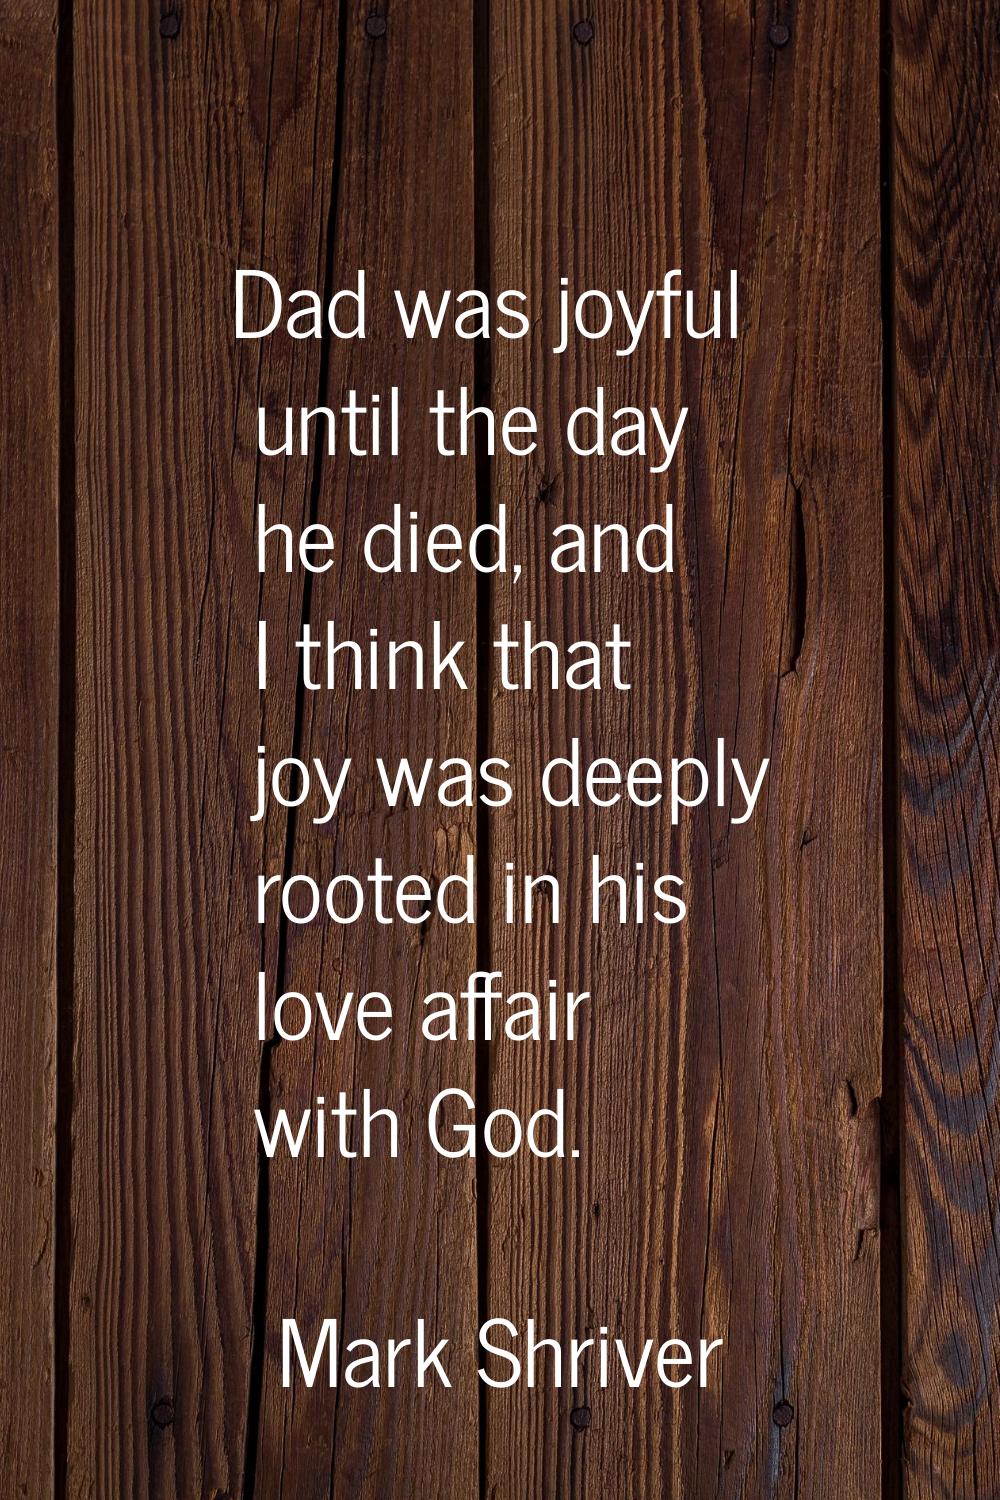 Dad was joyful until the day he died, and I think that joy was deeply rooted in his love affair wit